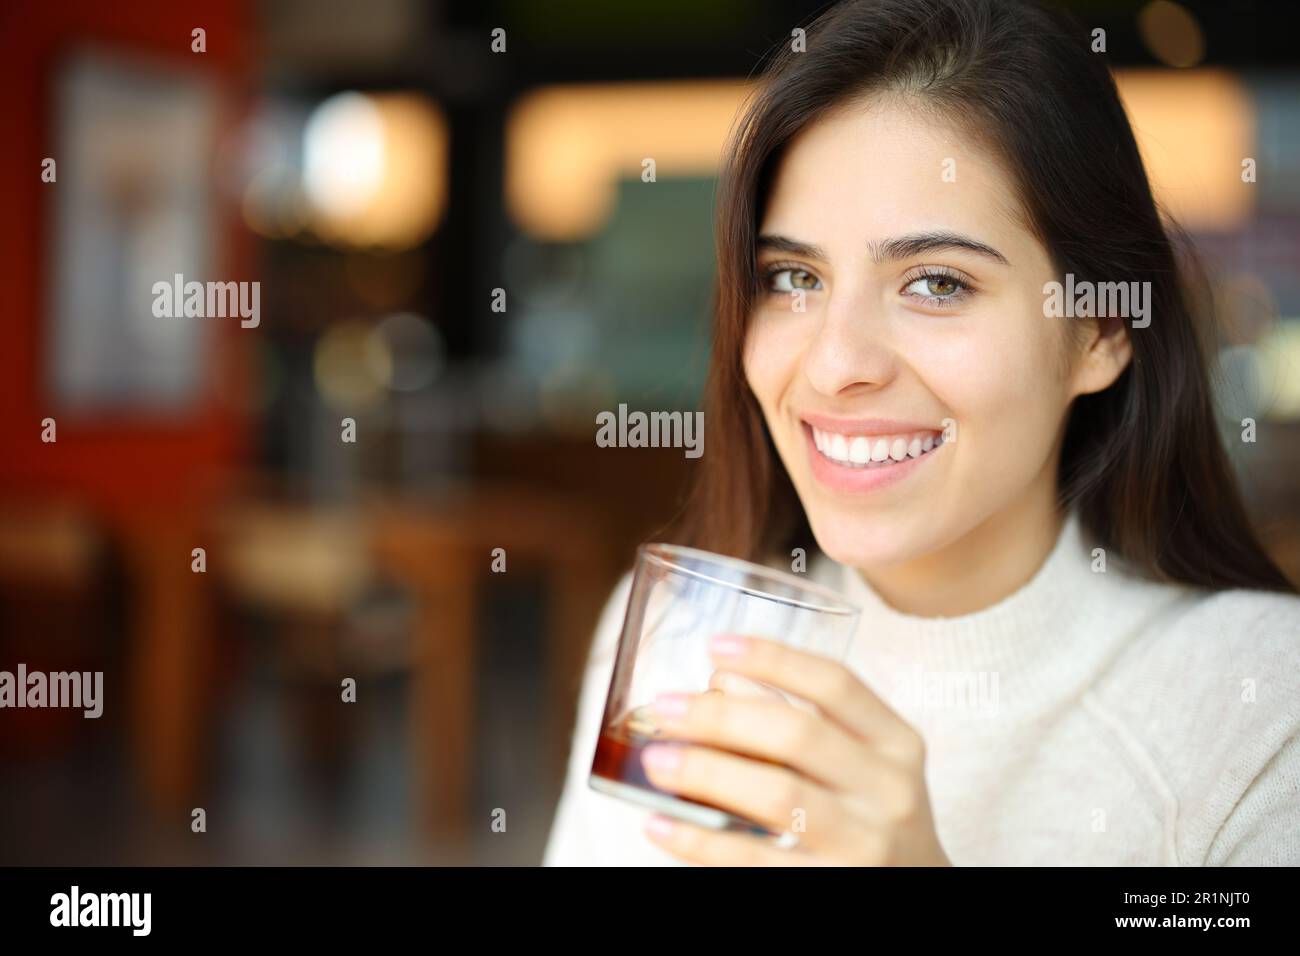 Happy woman holding soda glass in a bar looking at you Stock Photo